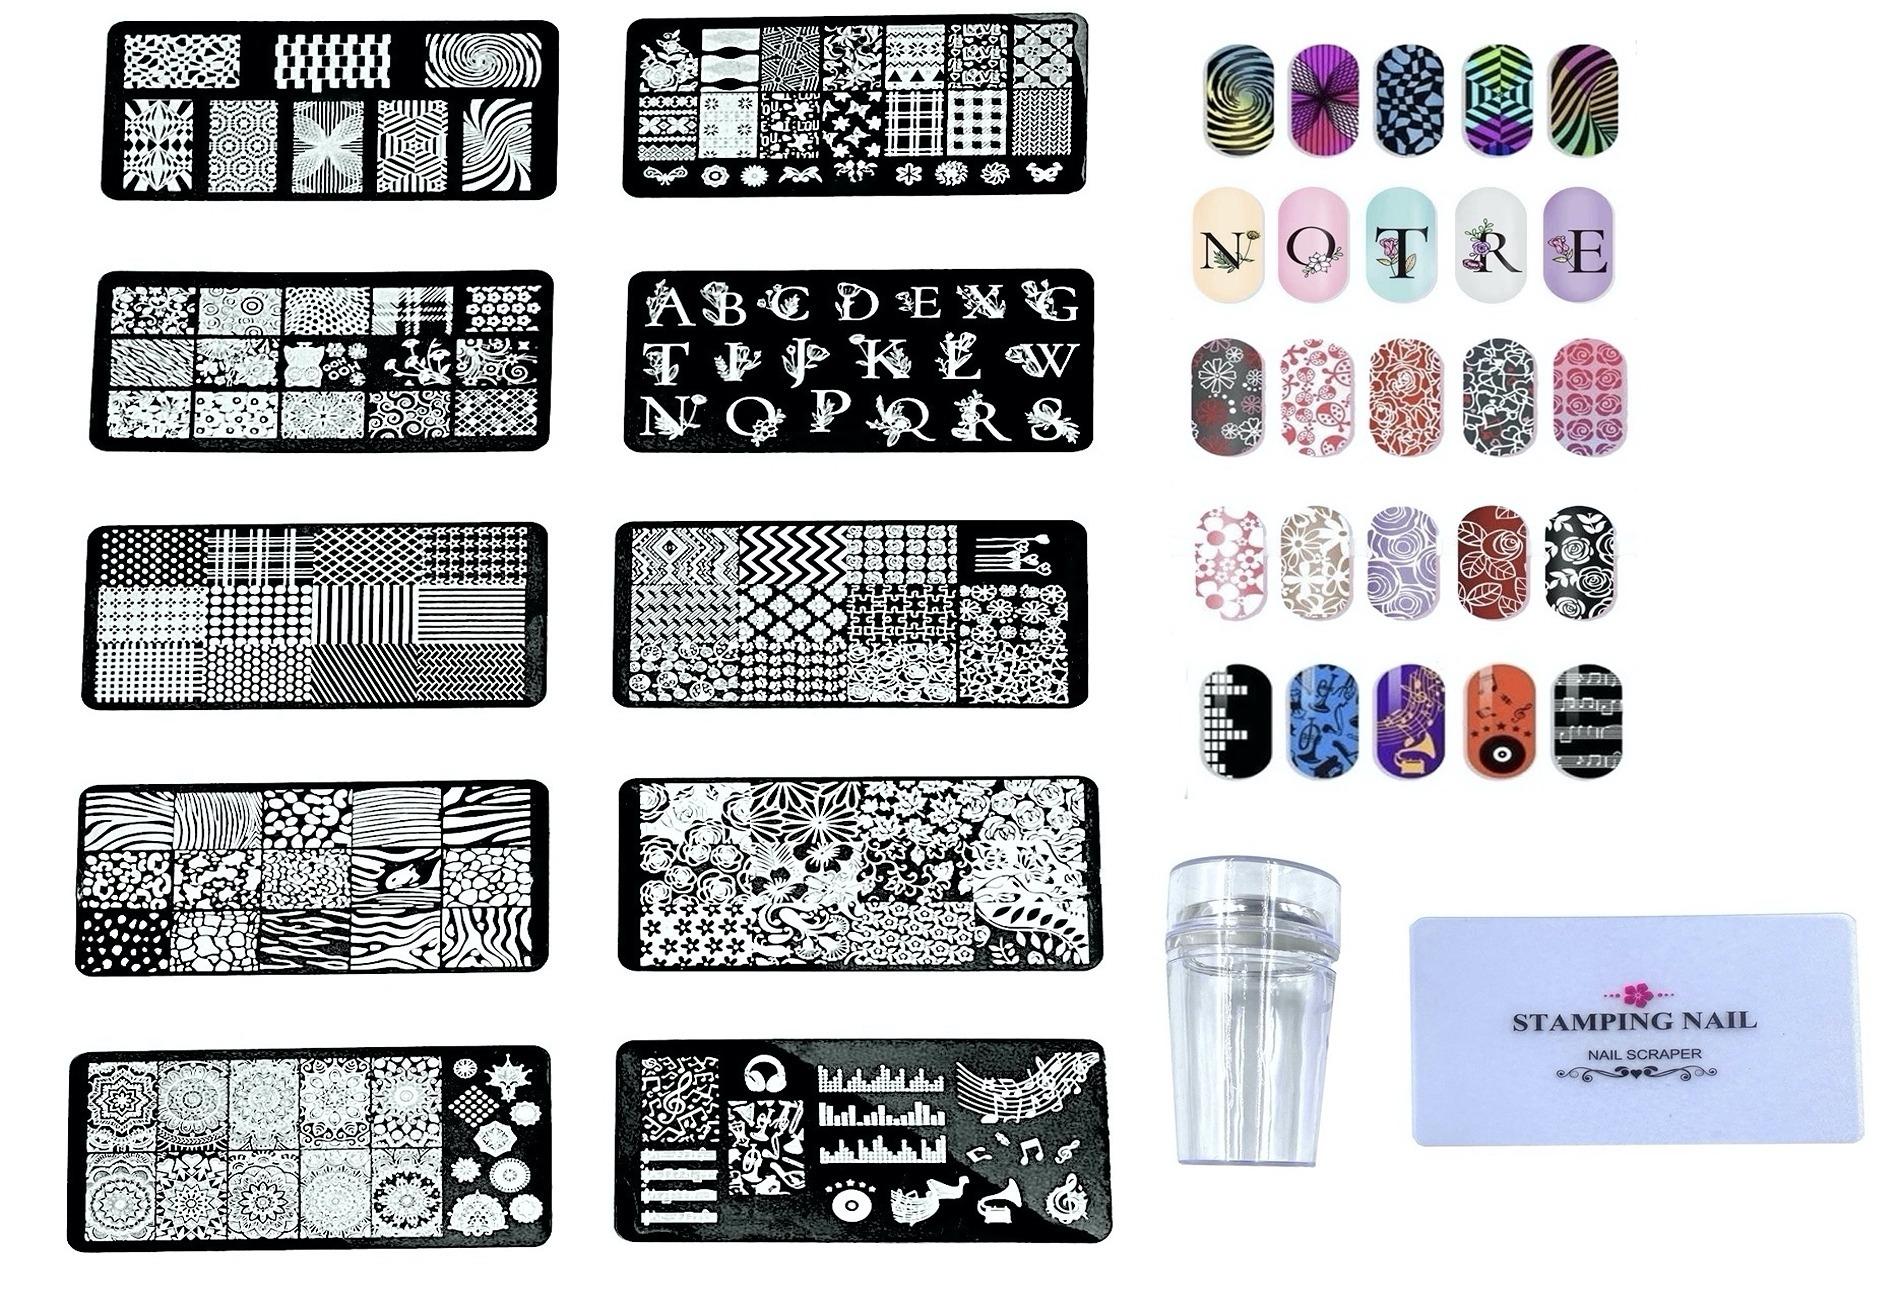 10 Pcs Nail Stamping Plates For Nail Art With Stamper And Scraper Included.  12 x 6 Cm - JioMart